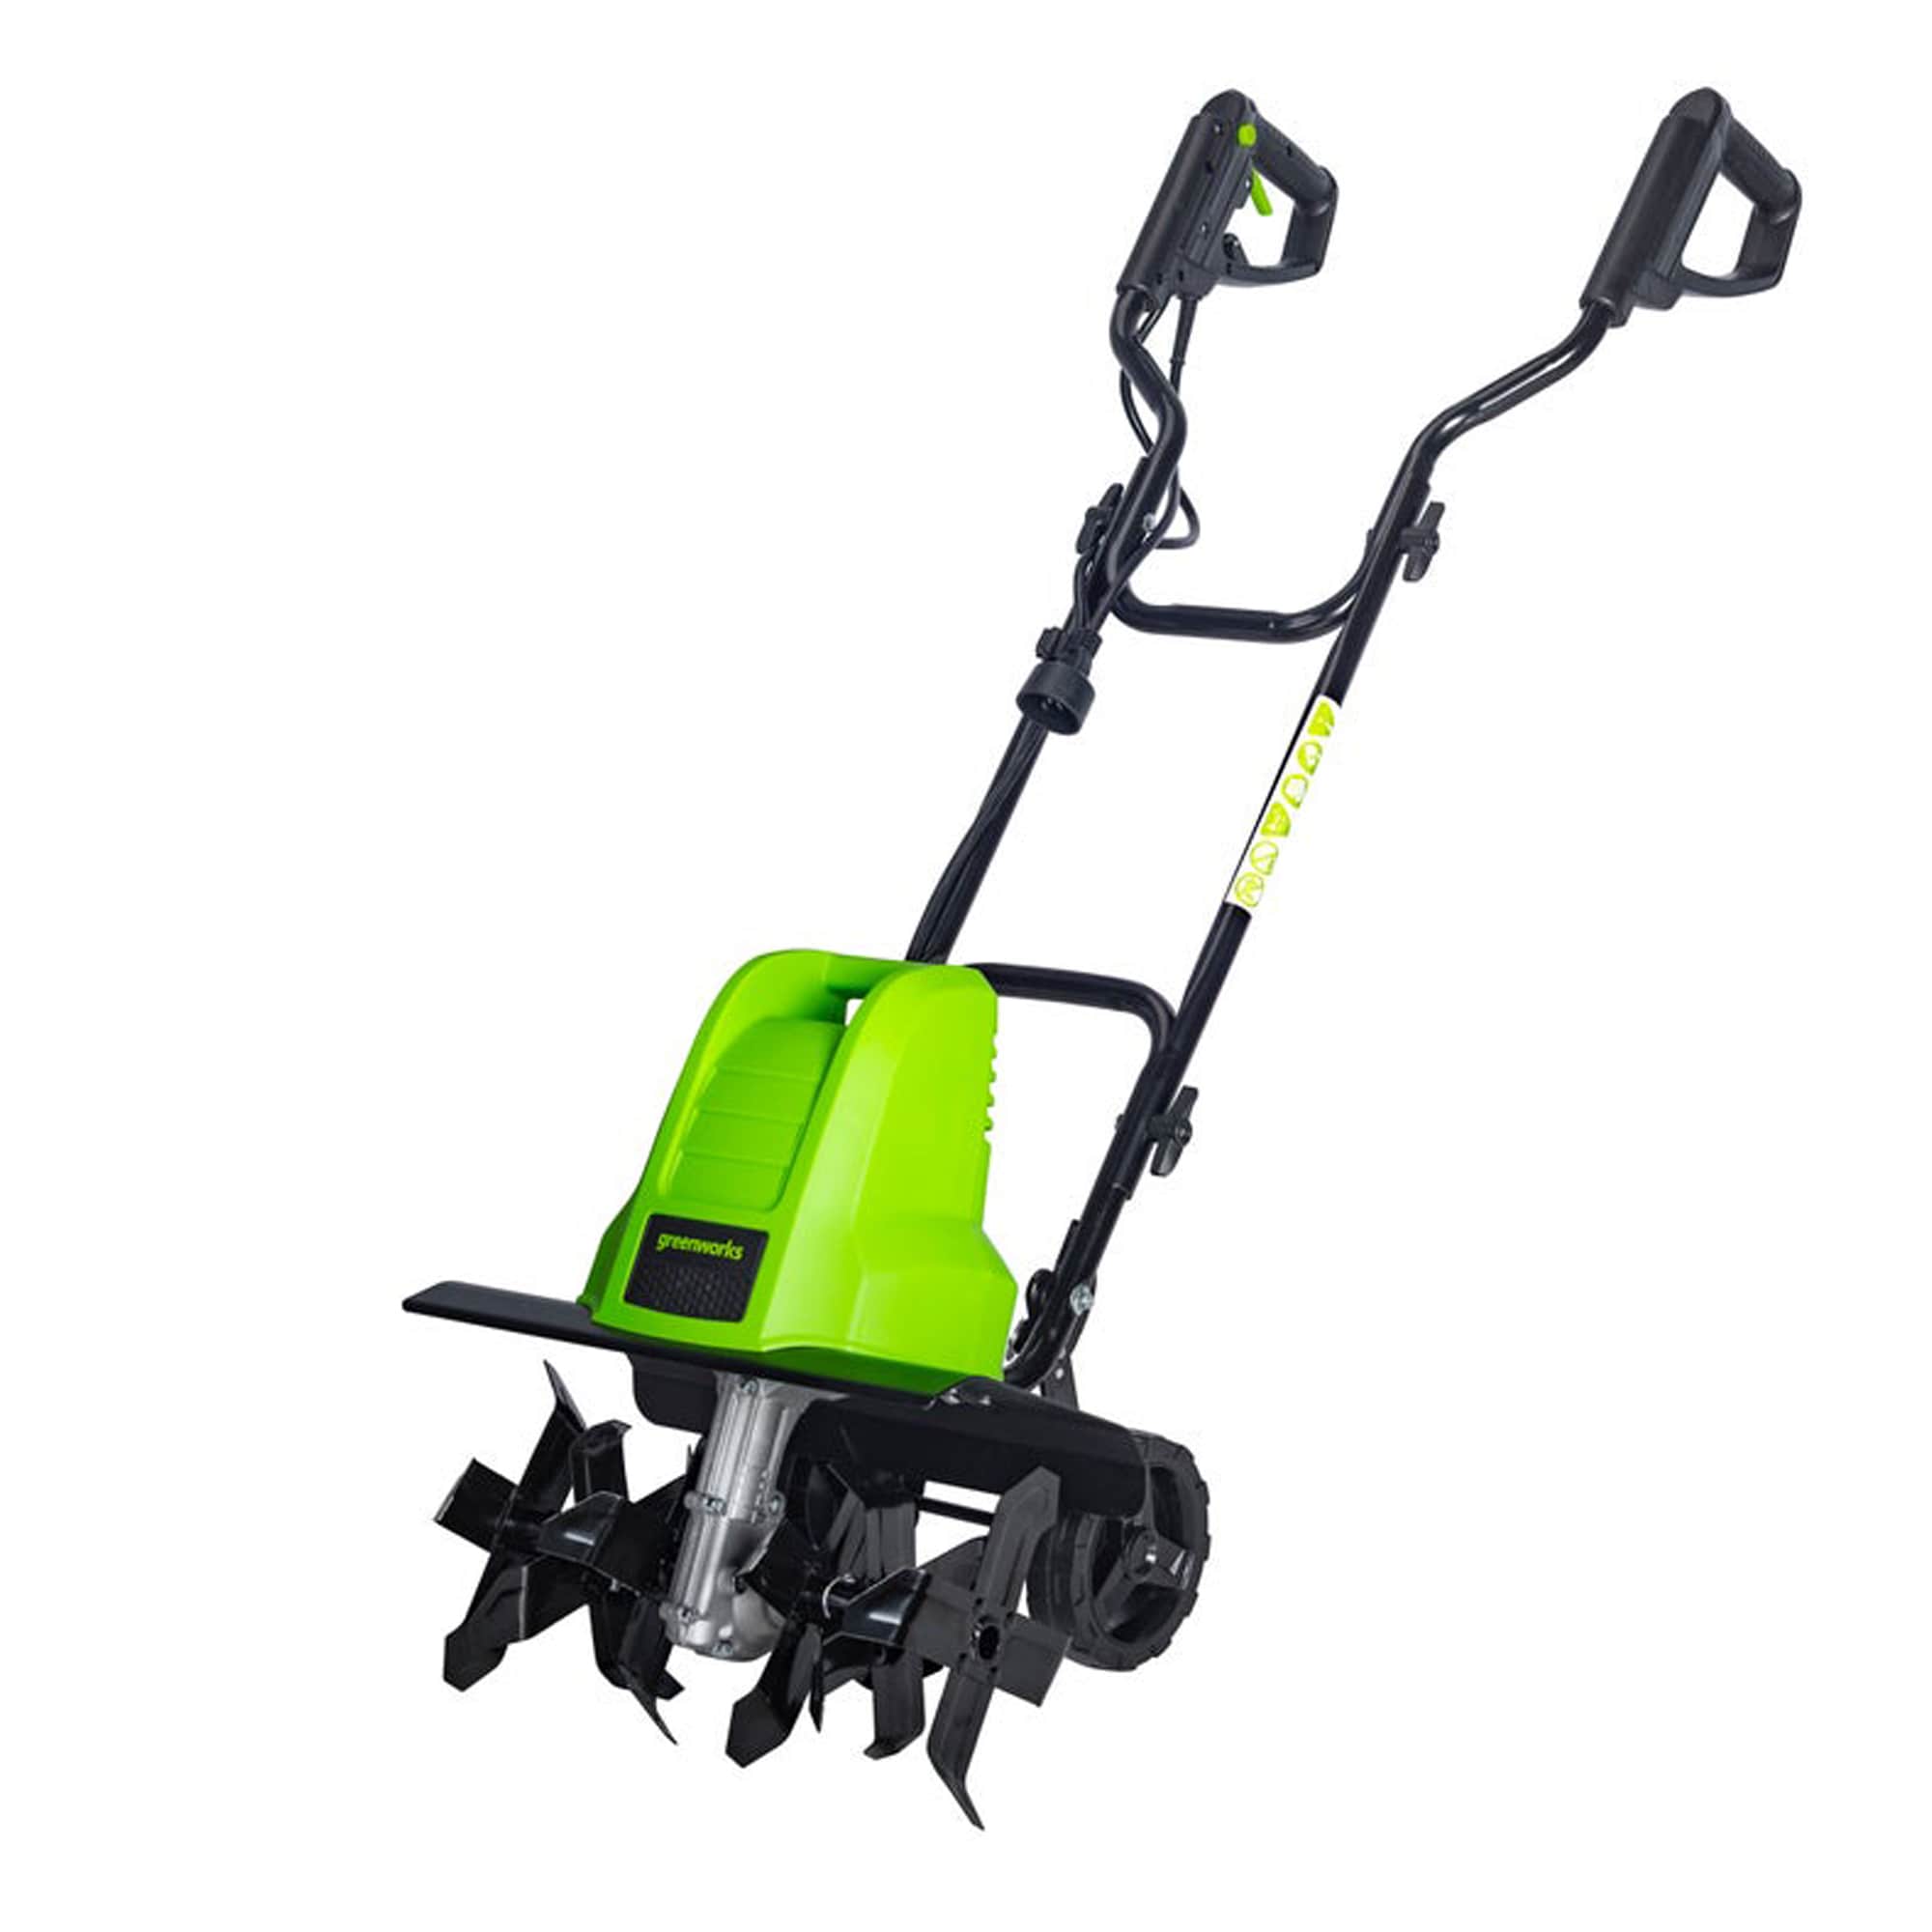 Image of Greenworks 13.5 Amp Corded Electric Cultivator